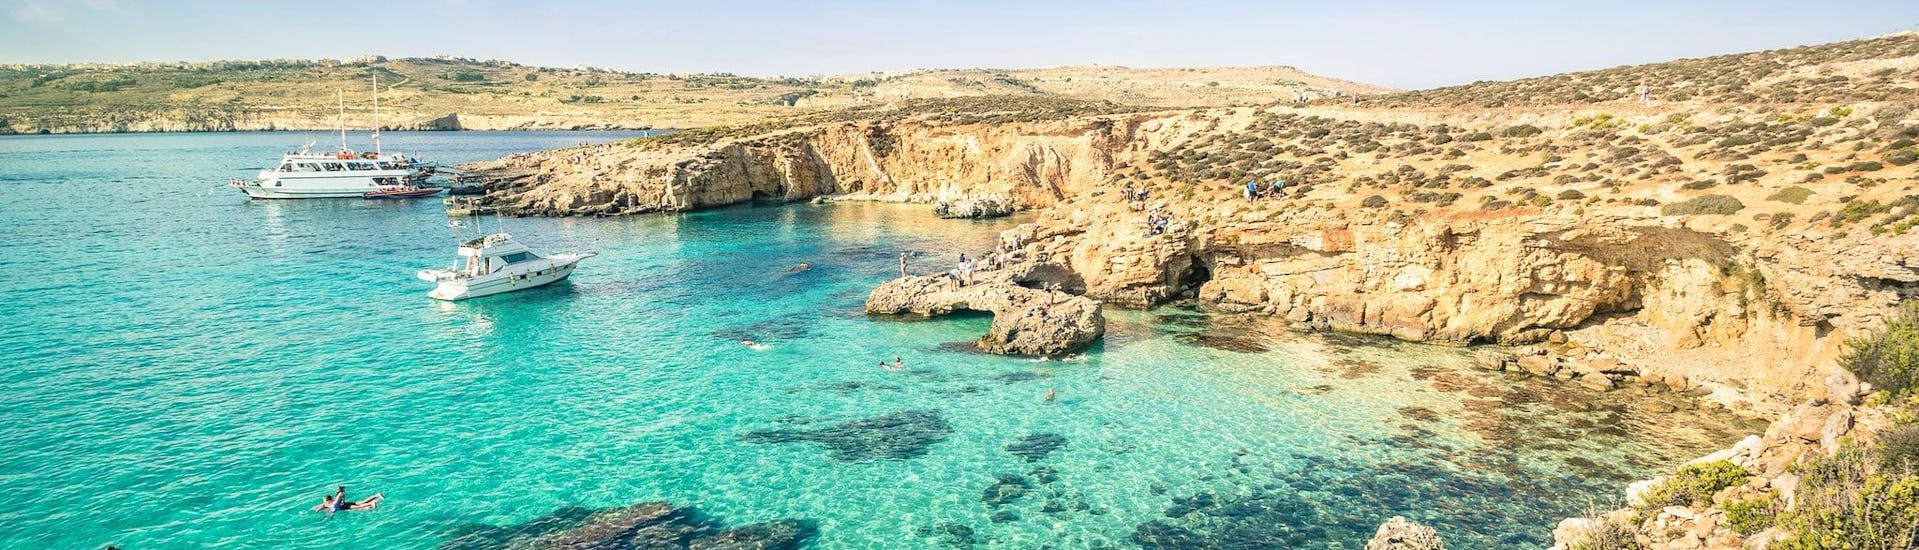 View of the famous Blue Lagoon, which is a popular destination for boat trips from Bugibba, Malta.